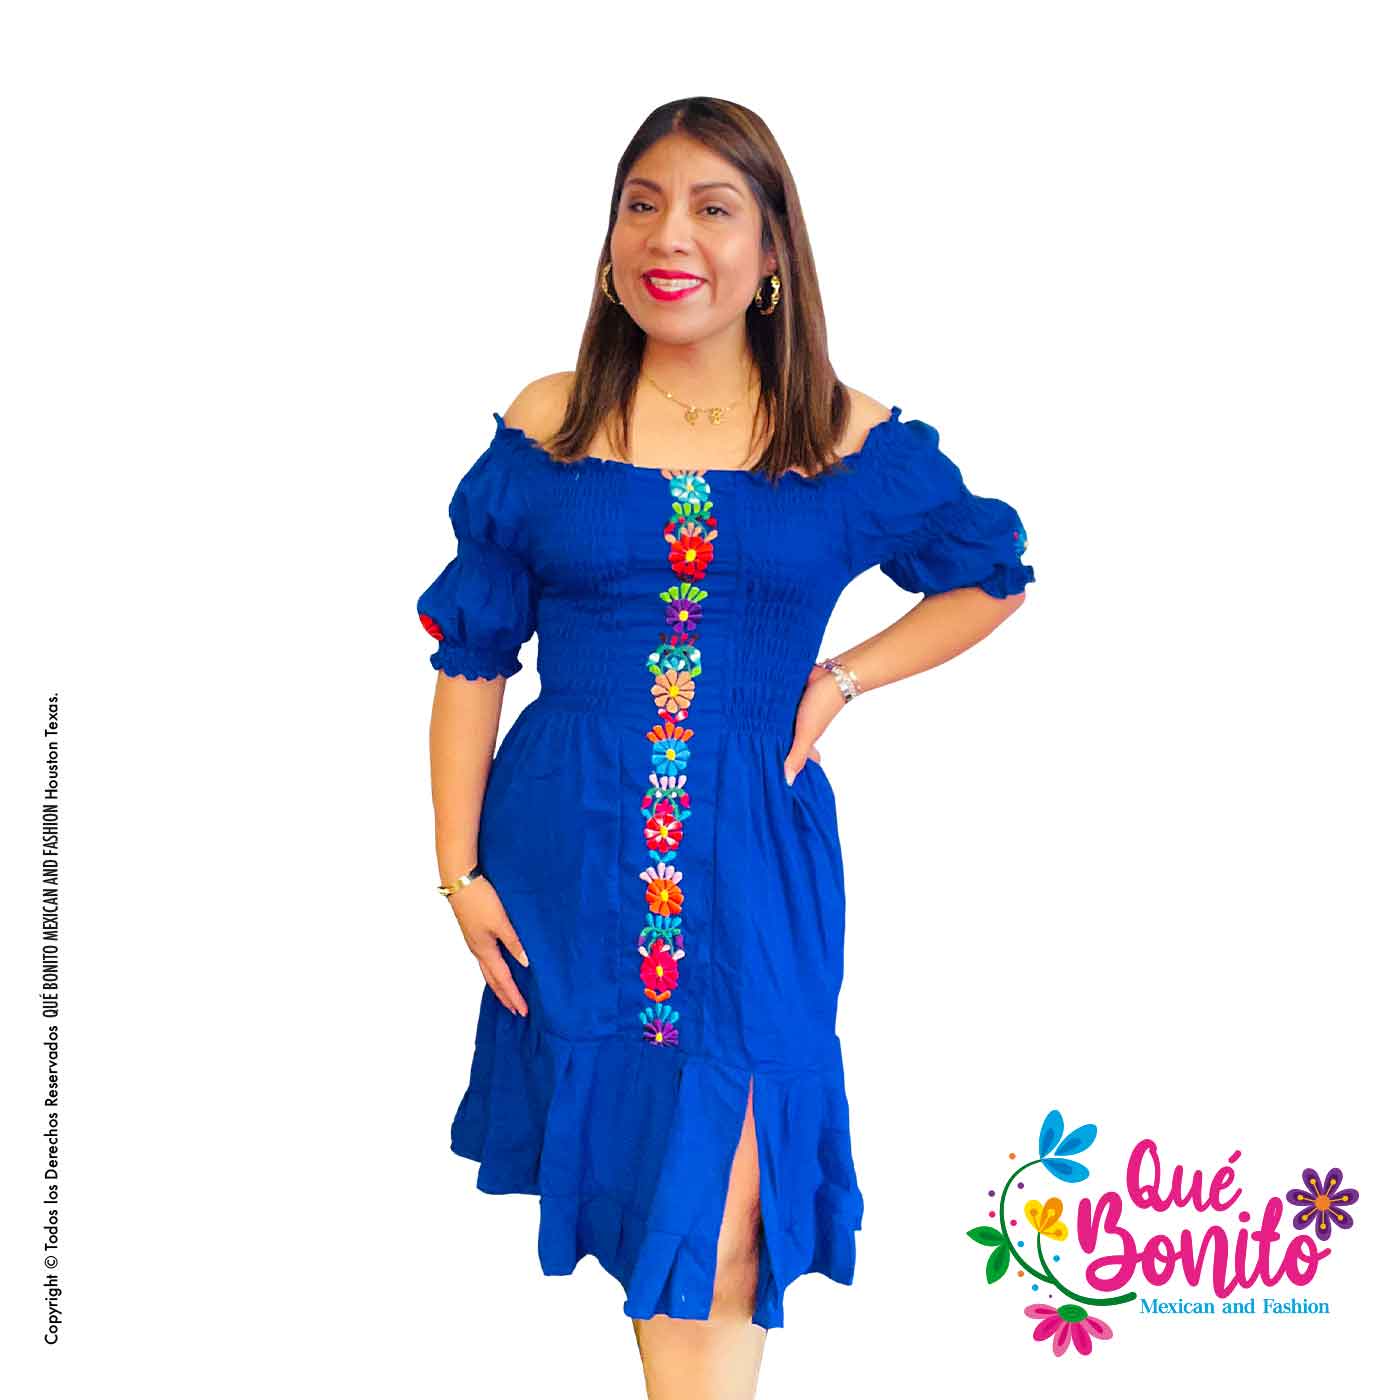 Innombrable Royal Blue Dress Que Bonito Mexican and Fashion